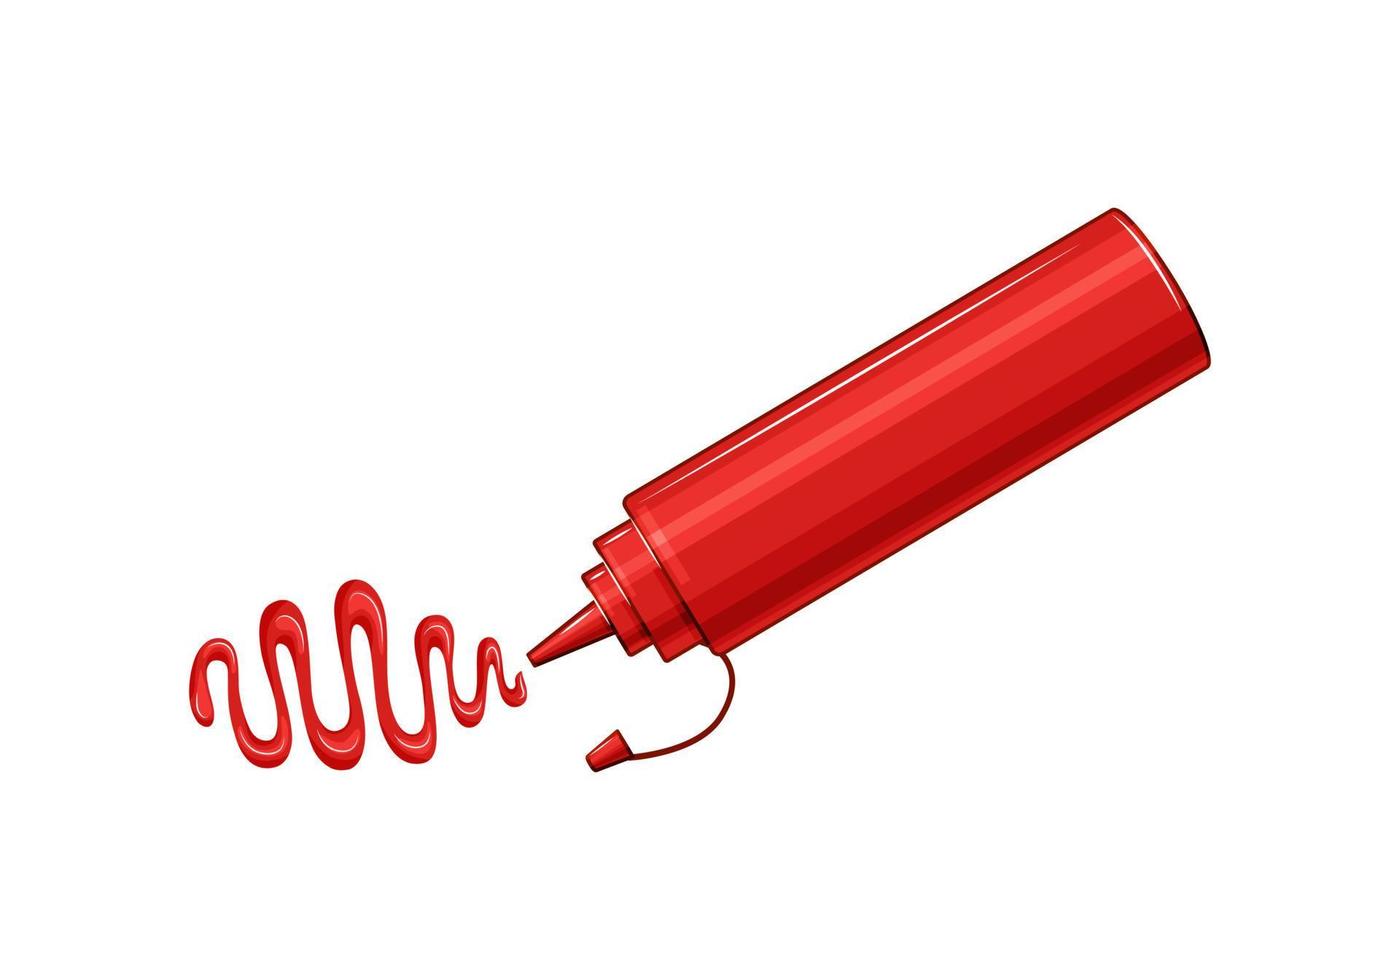 Ketchup is squeezed out of the bottle. Tomato sauce seasoning on a white isolated background. Vector illustration of a cartoon.